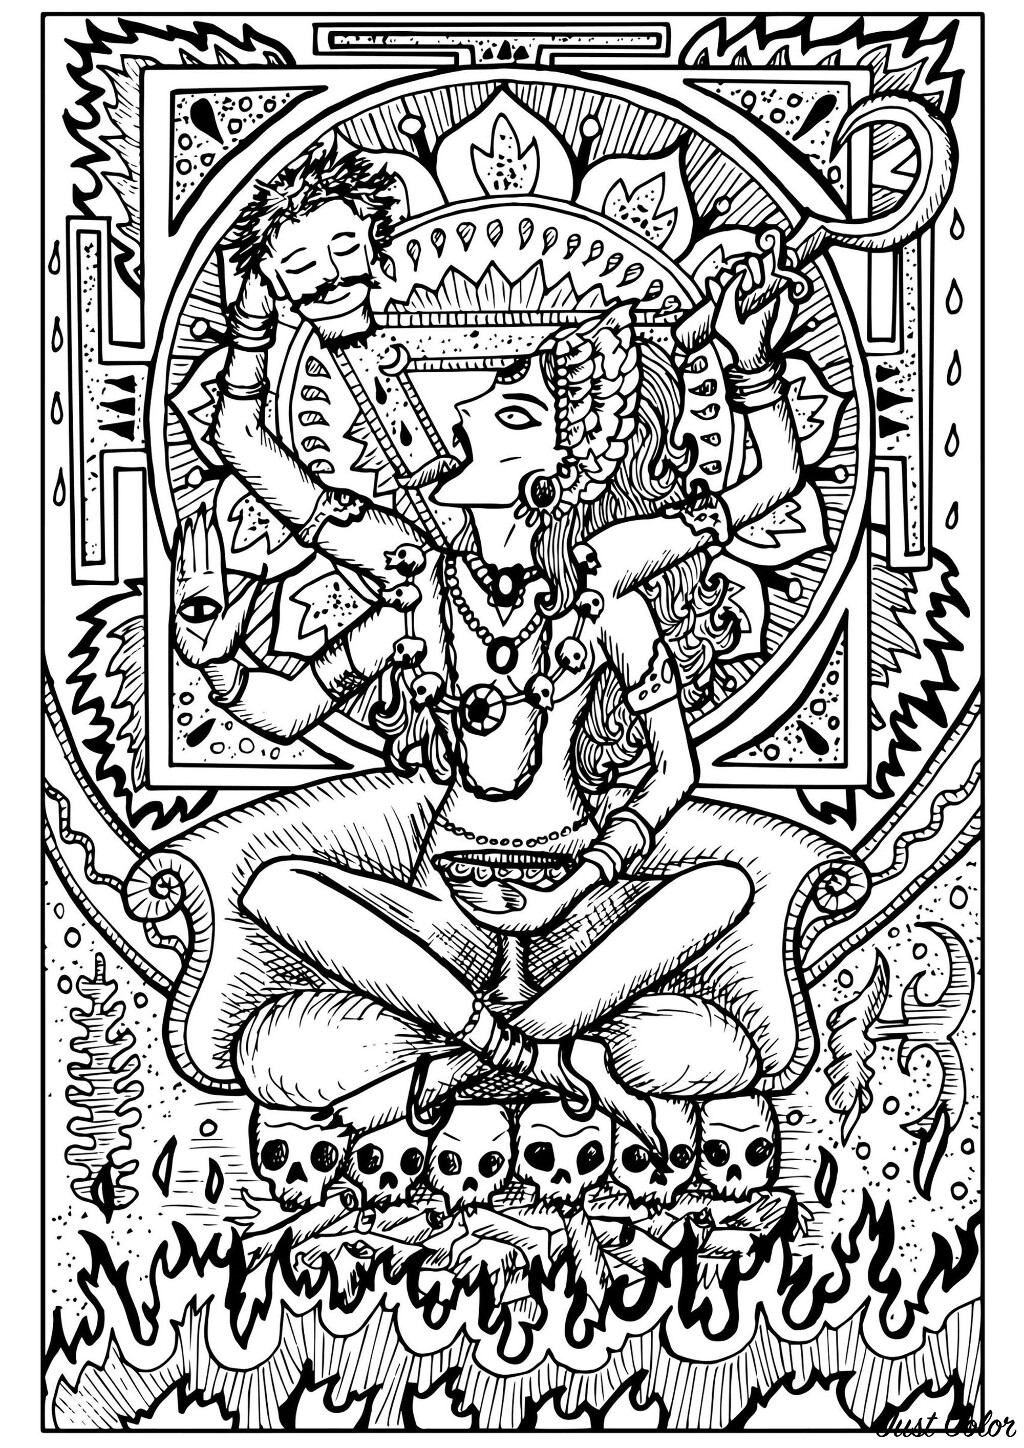 Kali is the goddess of preservation, transformation and destruction (in Hinduism). She removes the ego and liberates the soul from the cycle of birth and death.